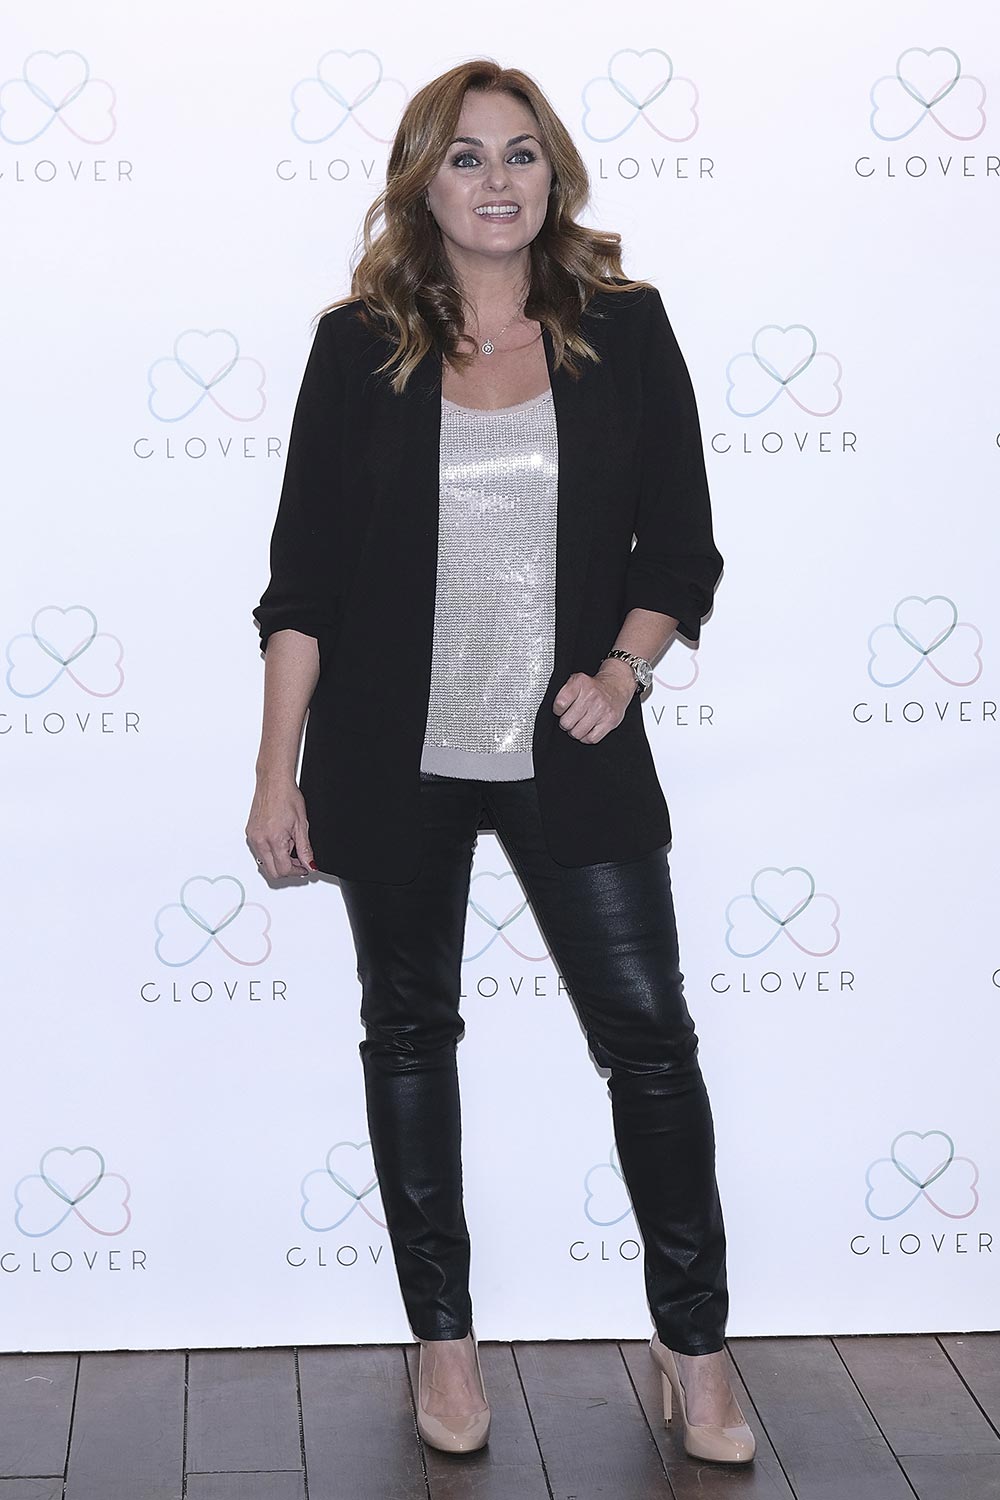 Carmen Morales attends the Clover events agency presentation